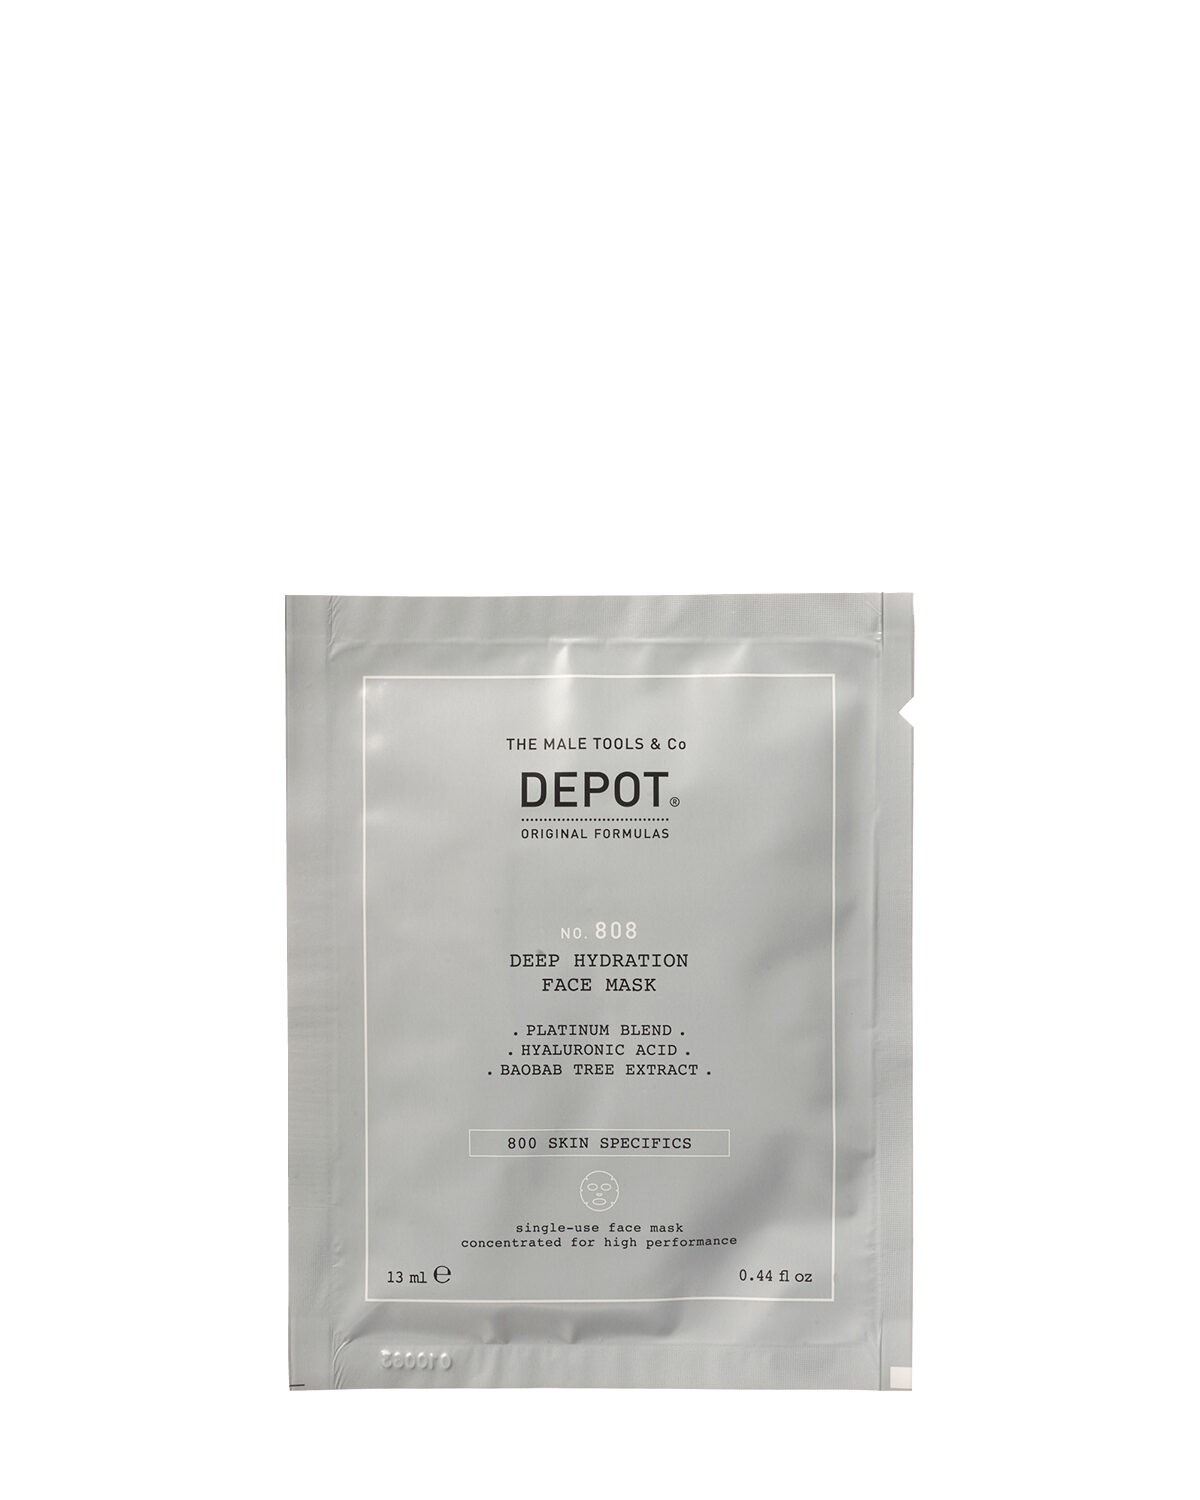 Depot, 800 Skin Specifics No. 808, Hyaluronic Acid, Deeply Hydrating/Soothing & Revitalizing, Sheet Mask, For Face, Day, 12 pcs, 13 ml